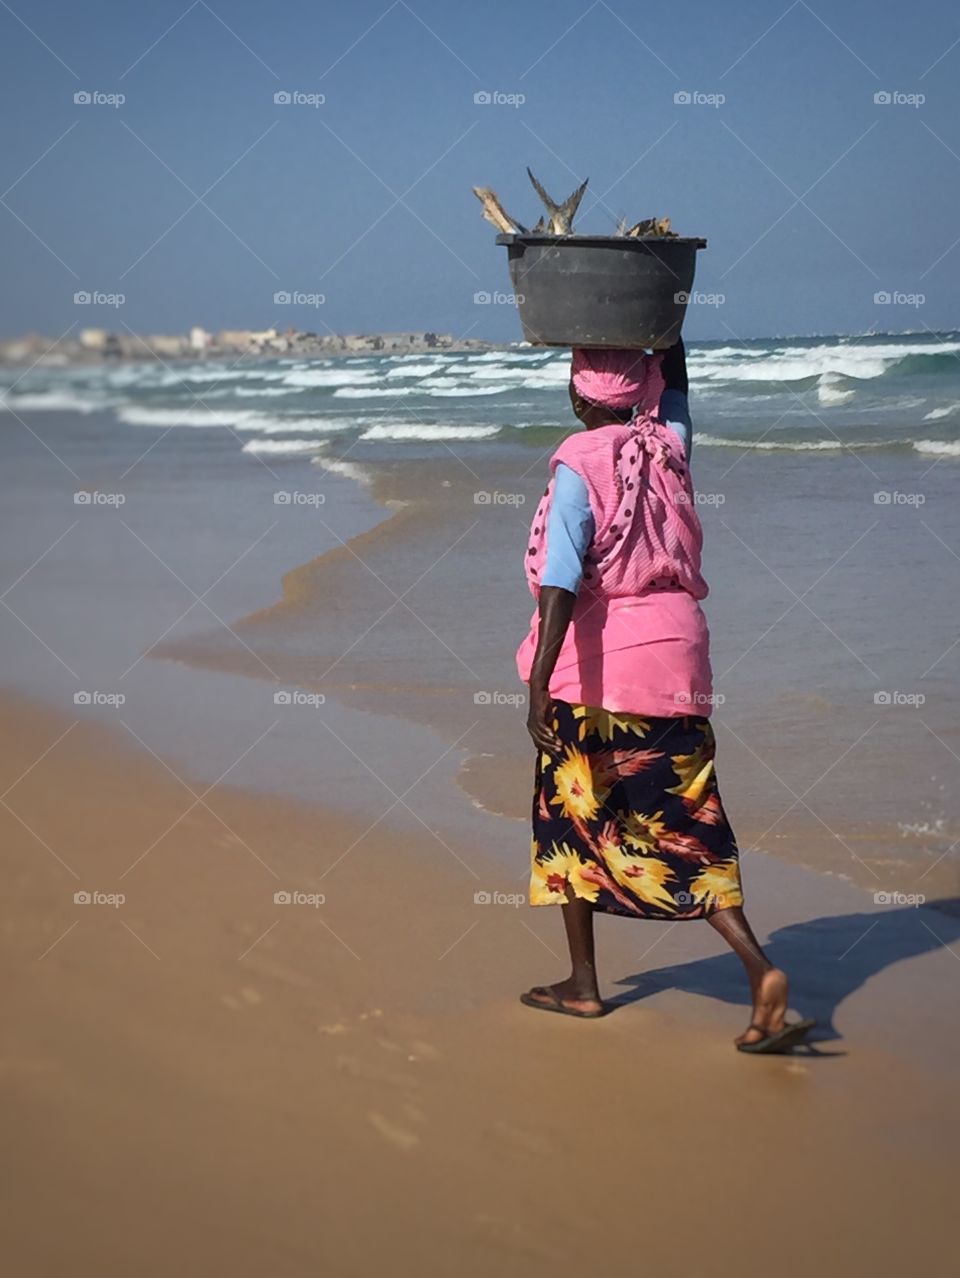 Woman carrying  fish in a bucket on her head.